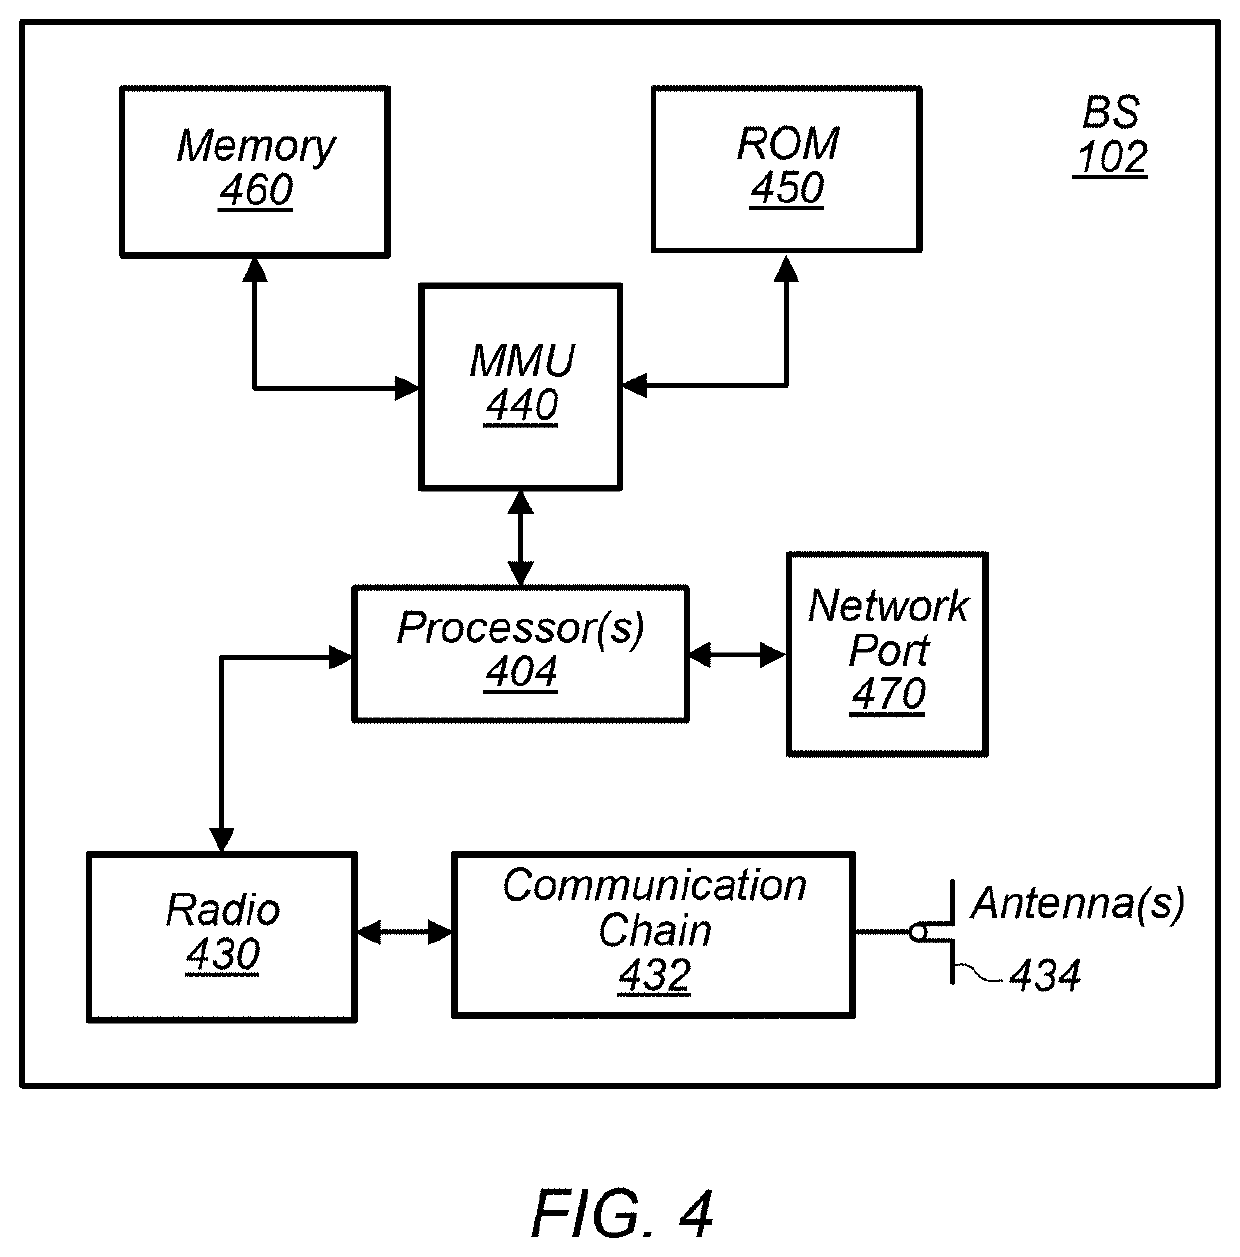 Mechanism for Low Latency Communication Using Historical Beam Information